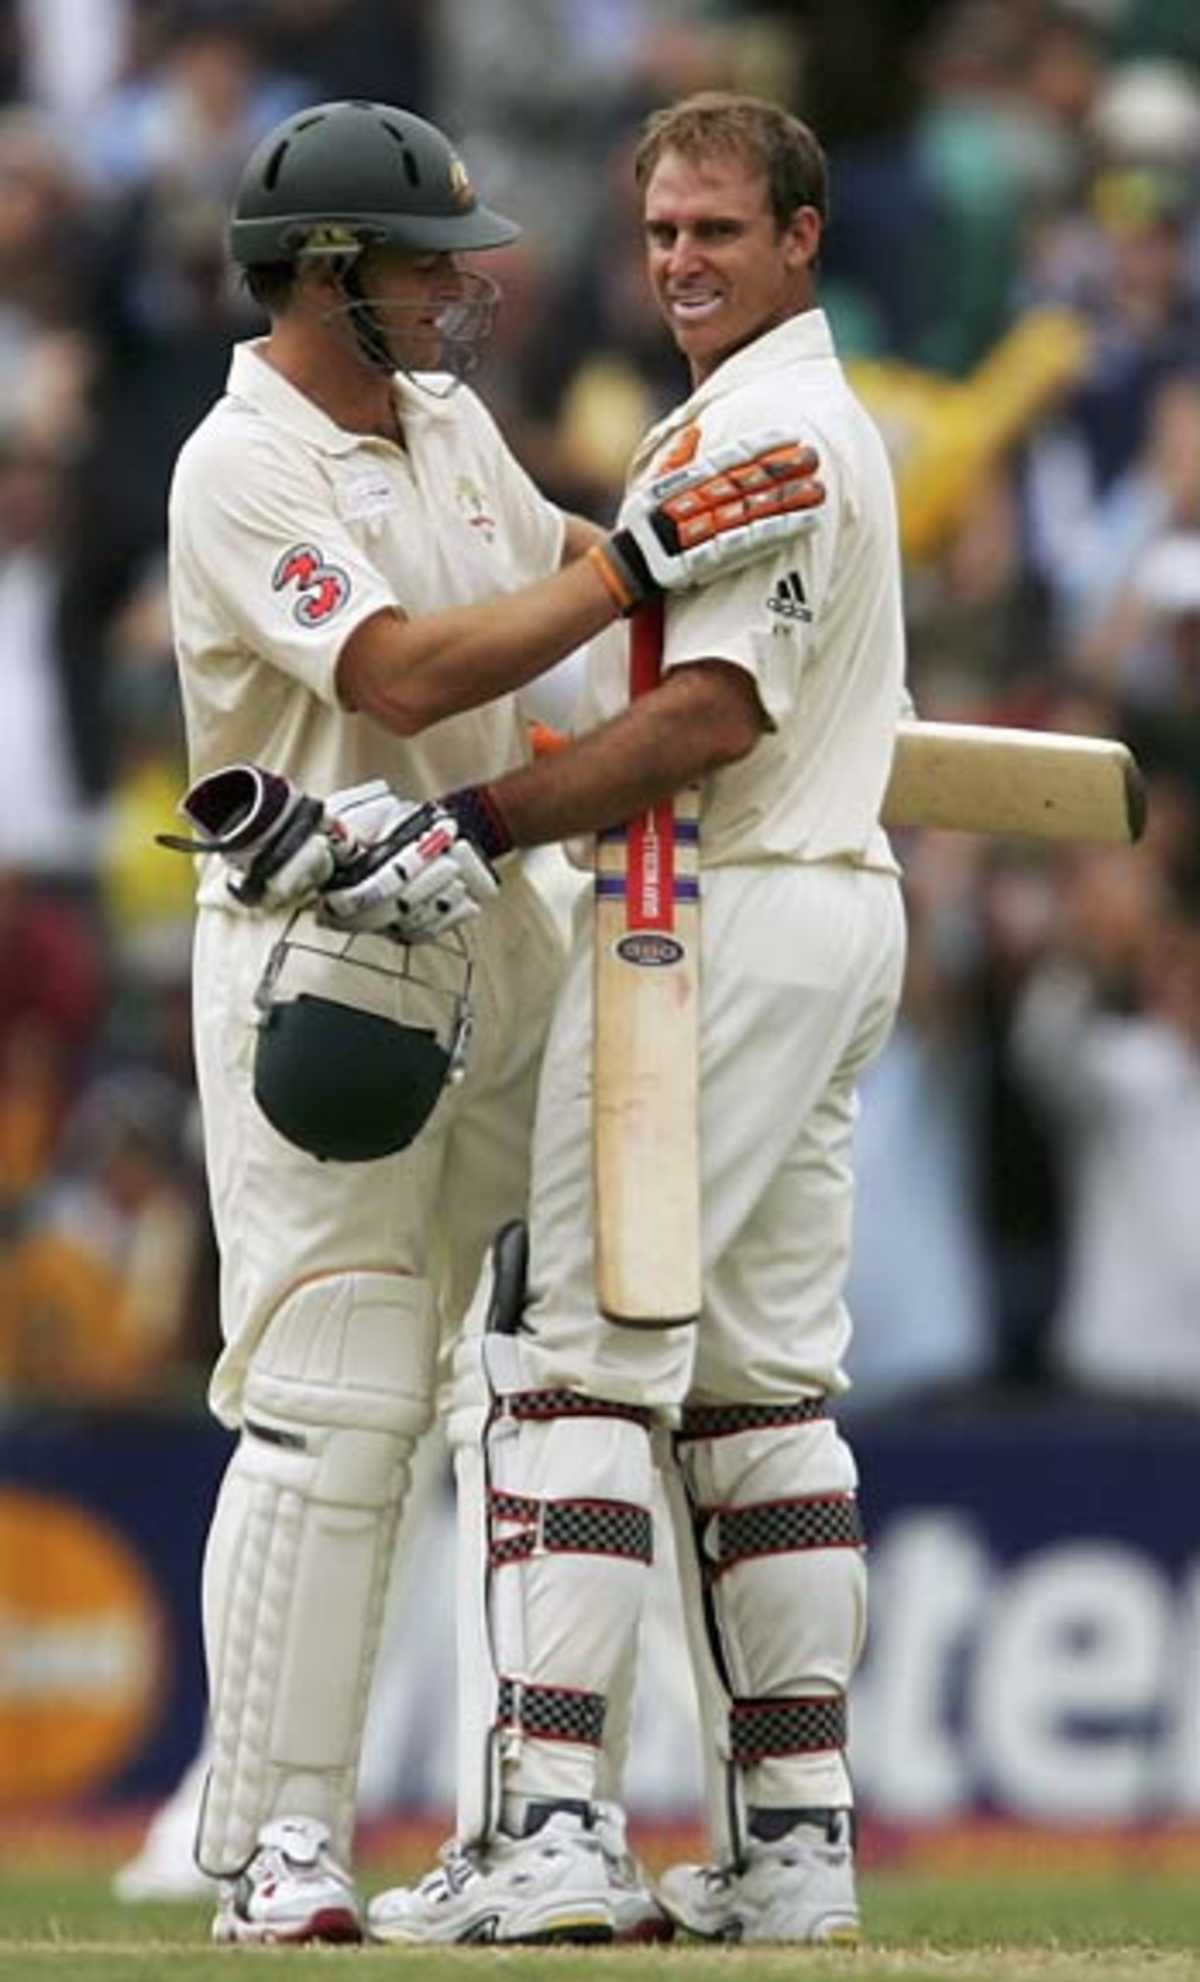 Matthew Hayden is congratulated by Adam Gilchrist on reaching his hundred, Australia v World XI, Day 1, Sydney Cricket Ground, October 14, 2005